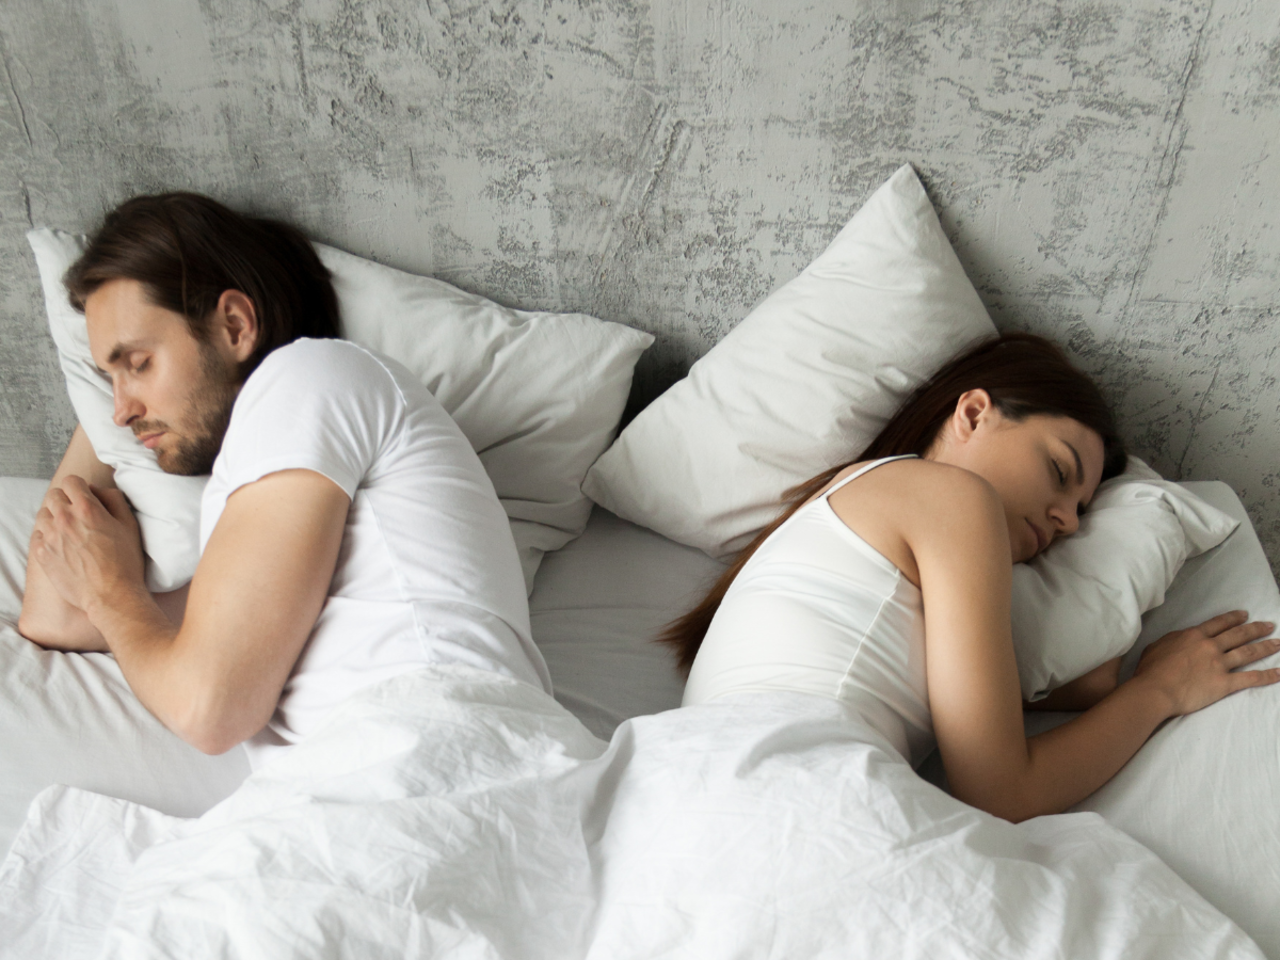 What is the sleep divorce trend thats catching up in couples? photo pic picture